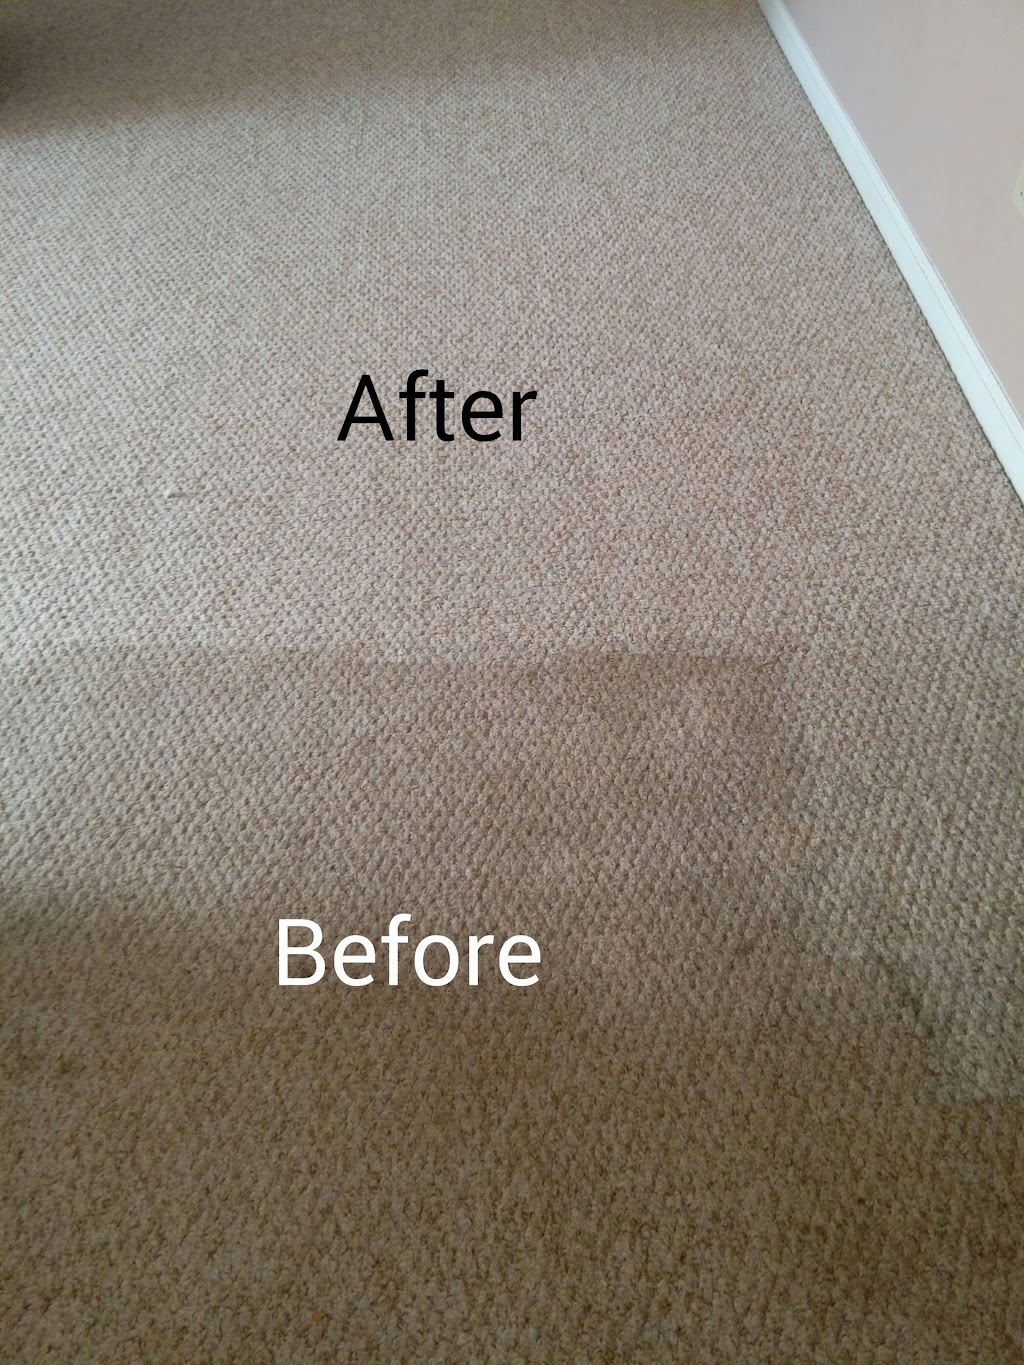 Katt Carpet and Upholstery cleaning | 308 Springdale Rd, Westfield, MA 01085 | Phone: (413) 388-2250